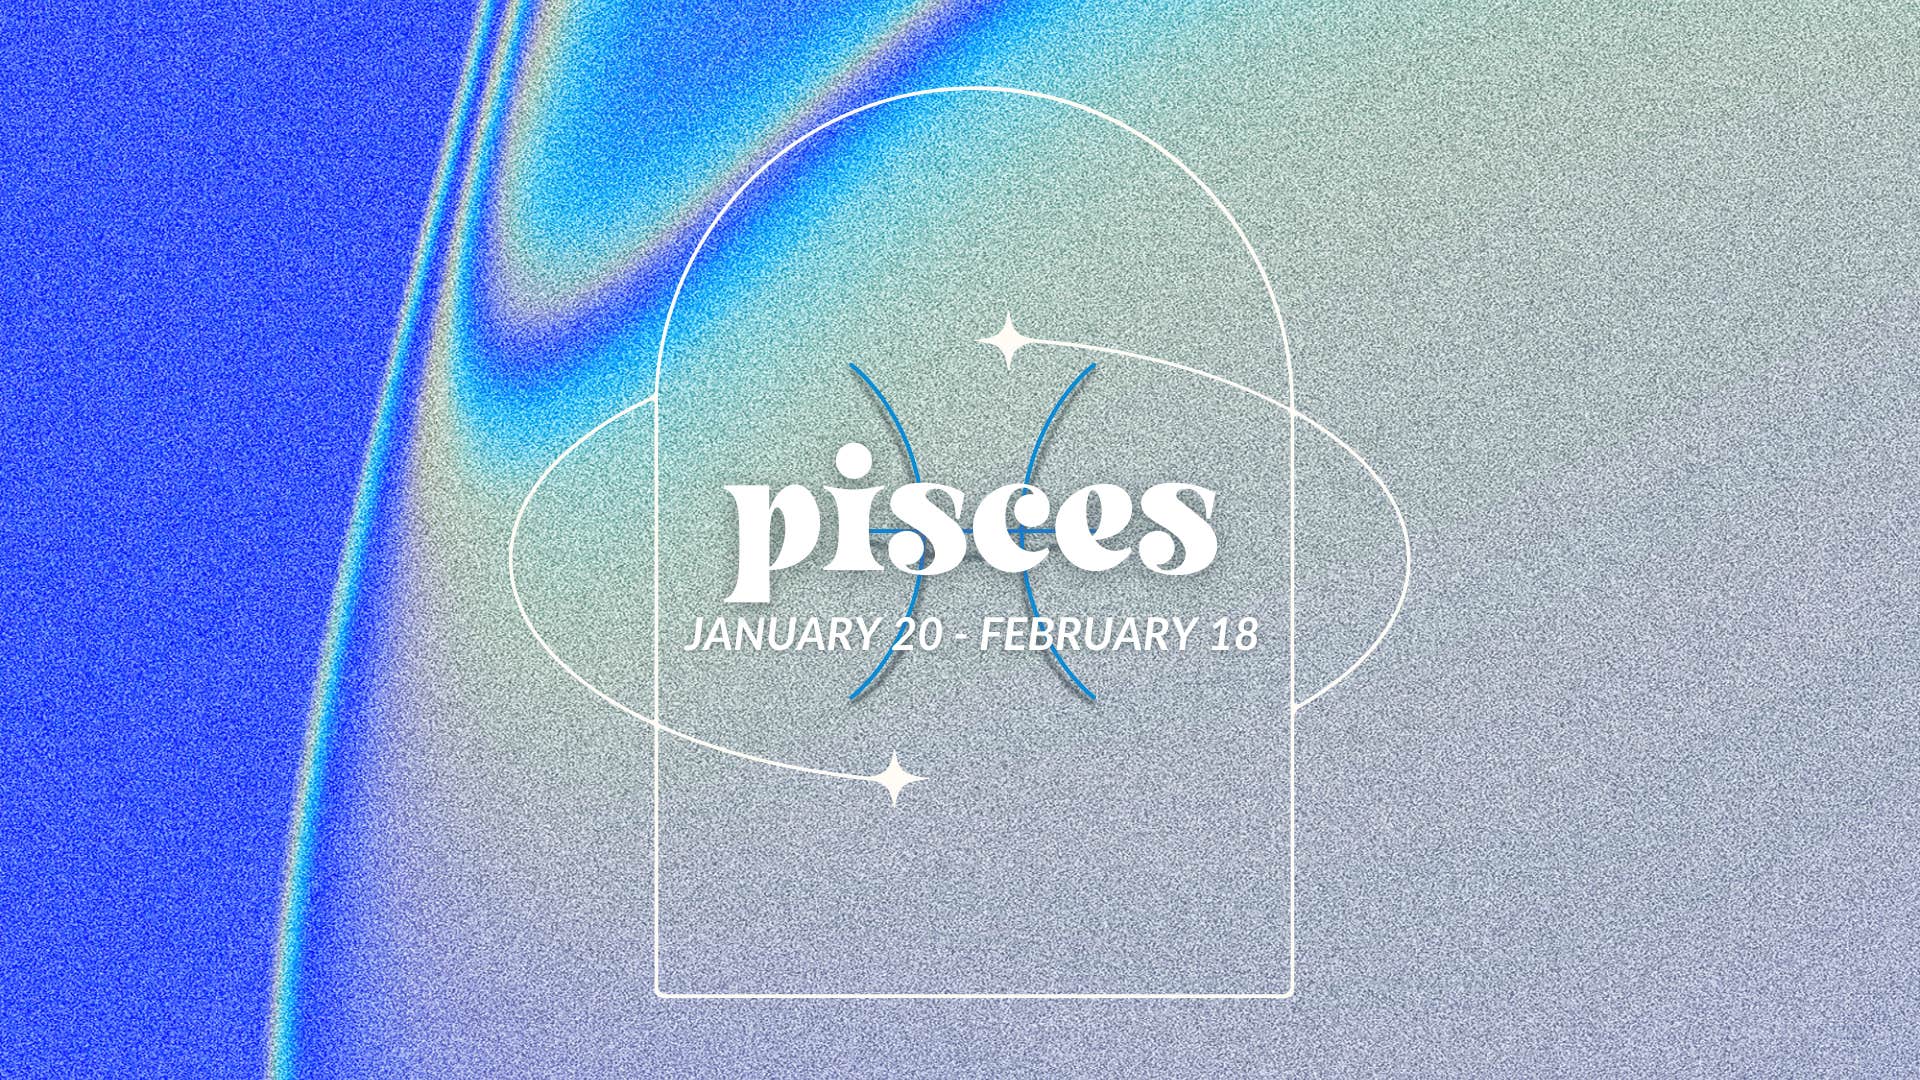 how the universe warns pisces of change